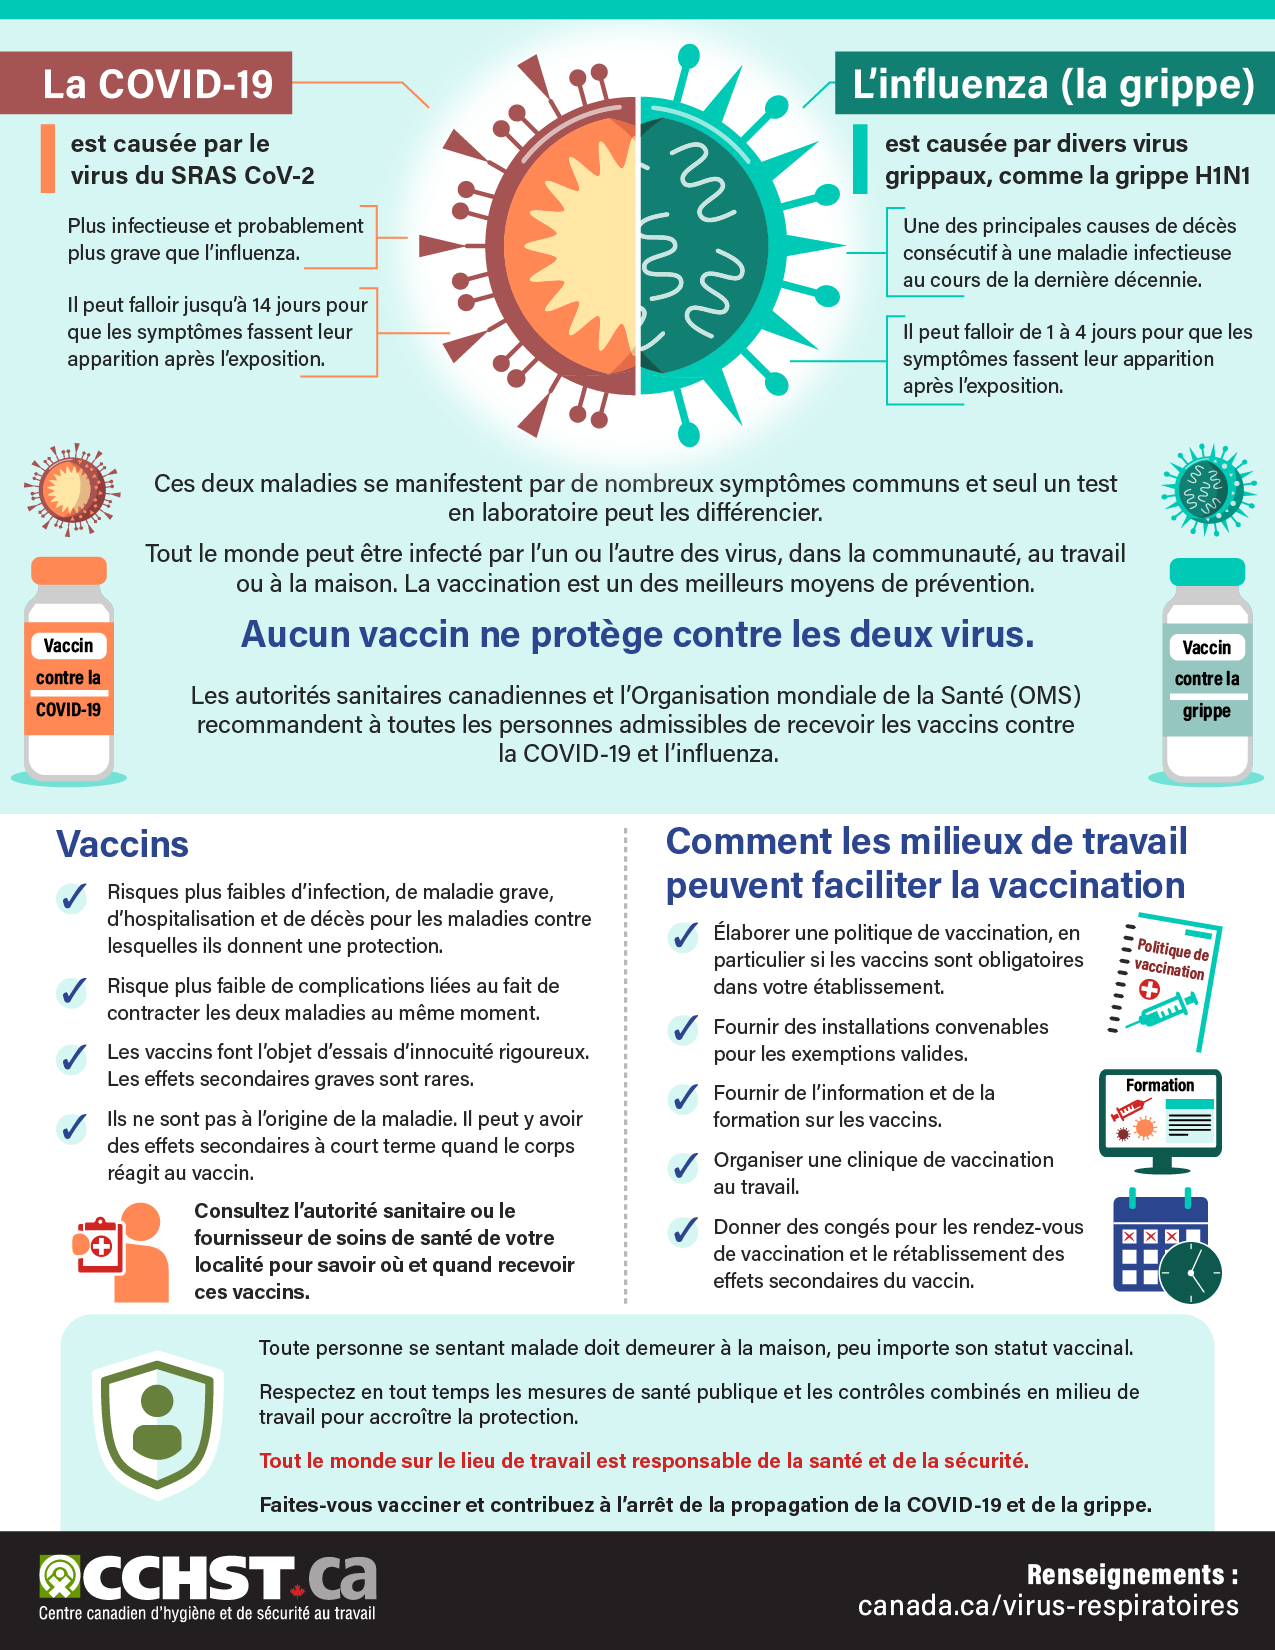 Infographic: COVID-19 and the Flu